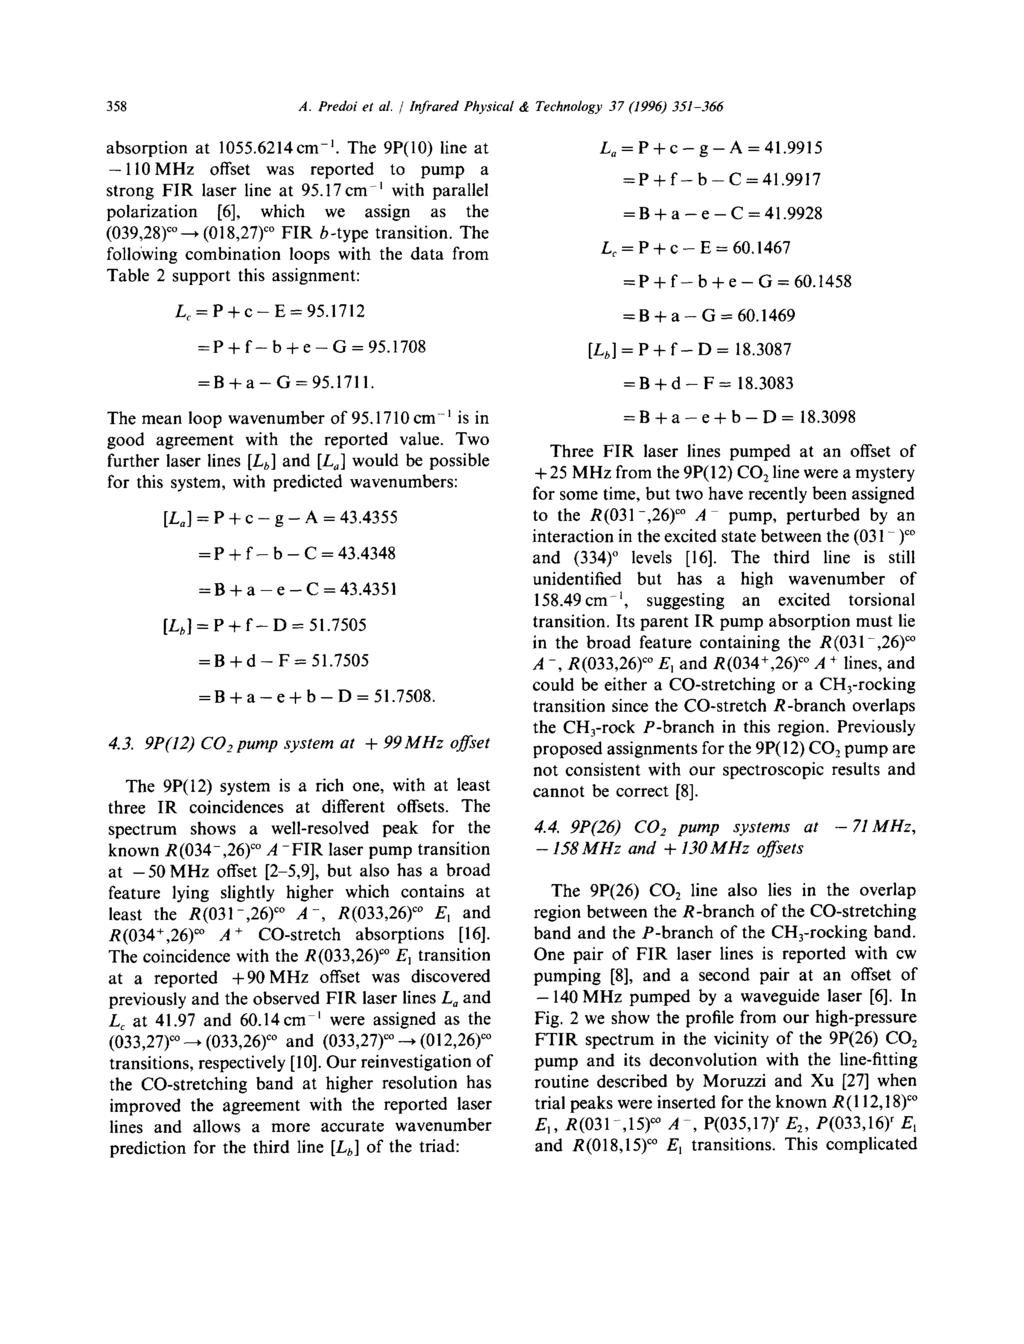 358 A. Predoi et al. / Infrared Physical & Technology 37 (1996) 351-366 absorption at 1055.6214cm -~. The 9P(10) line at -ll0mhz offset was reported to pump a strong FIR laser line at 95.